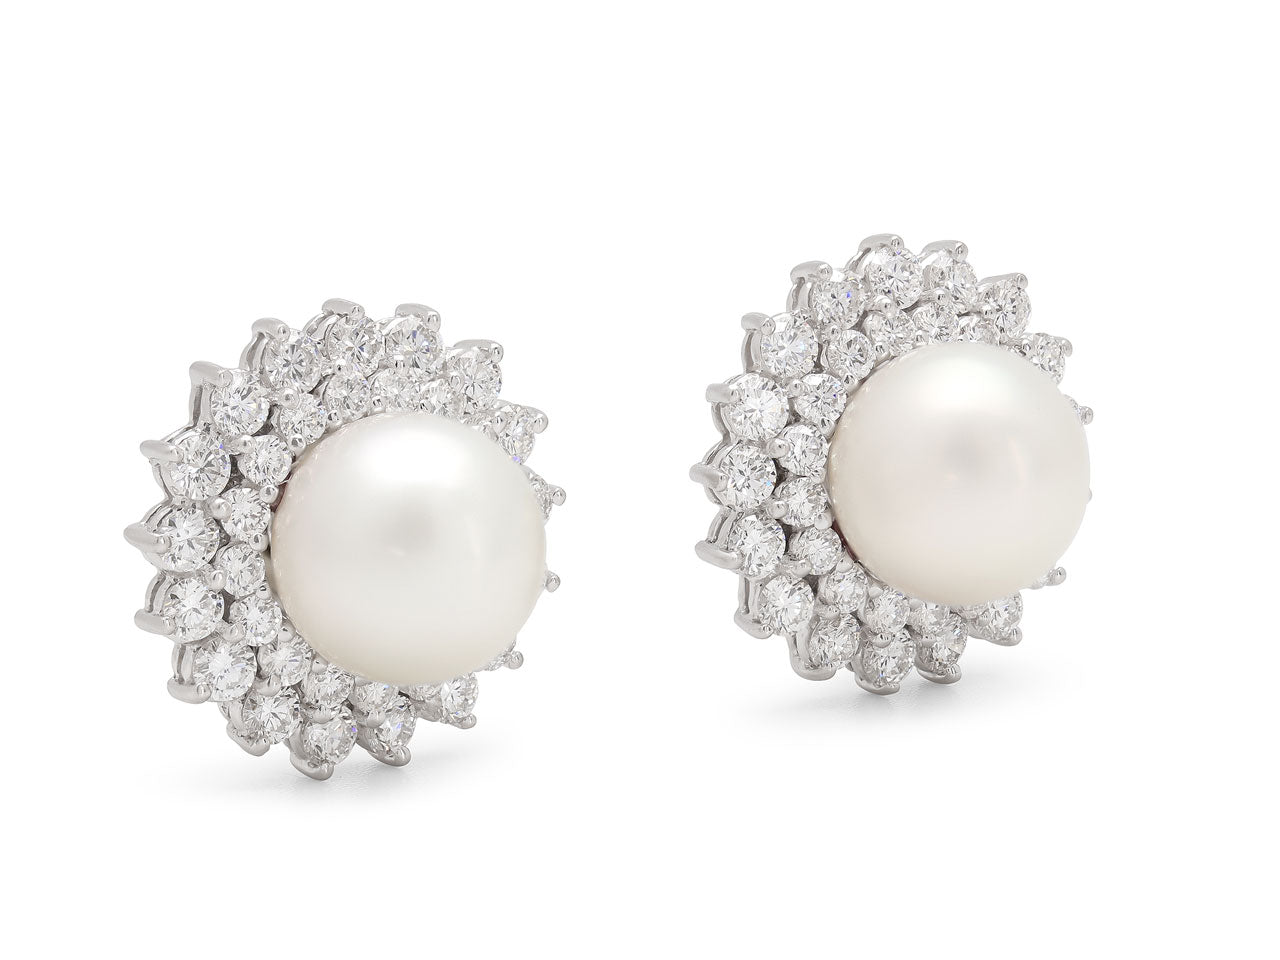 South Sea Pearl and Diamond Earrings in 18K White Gold